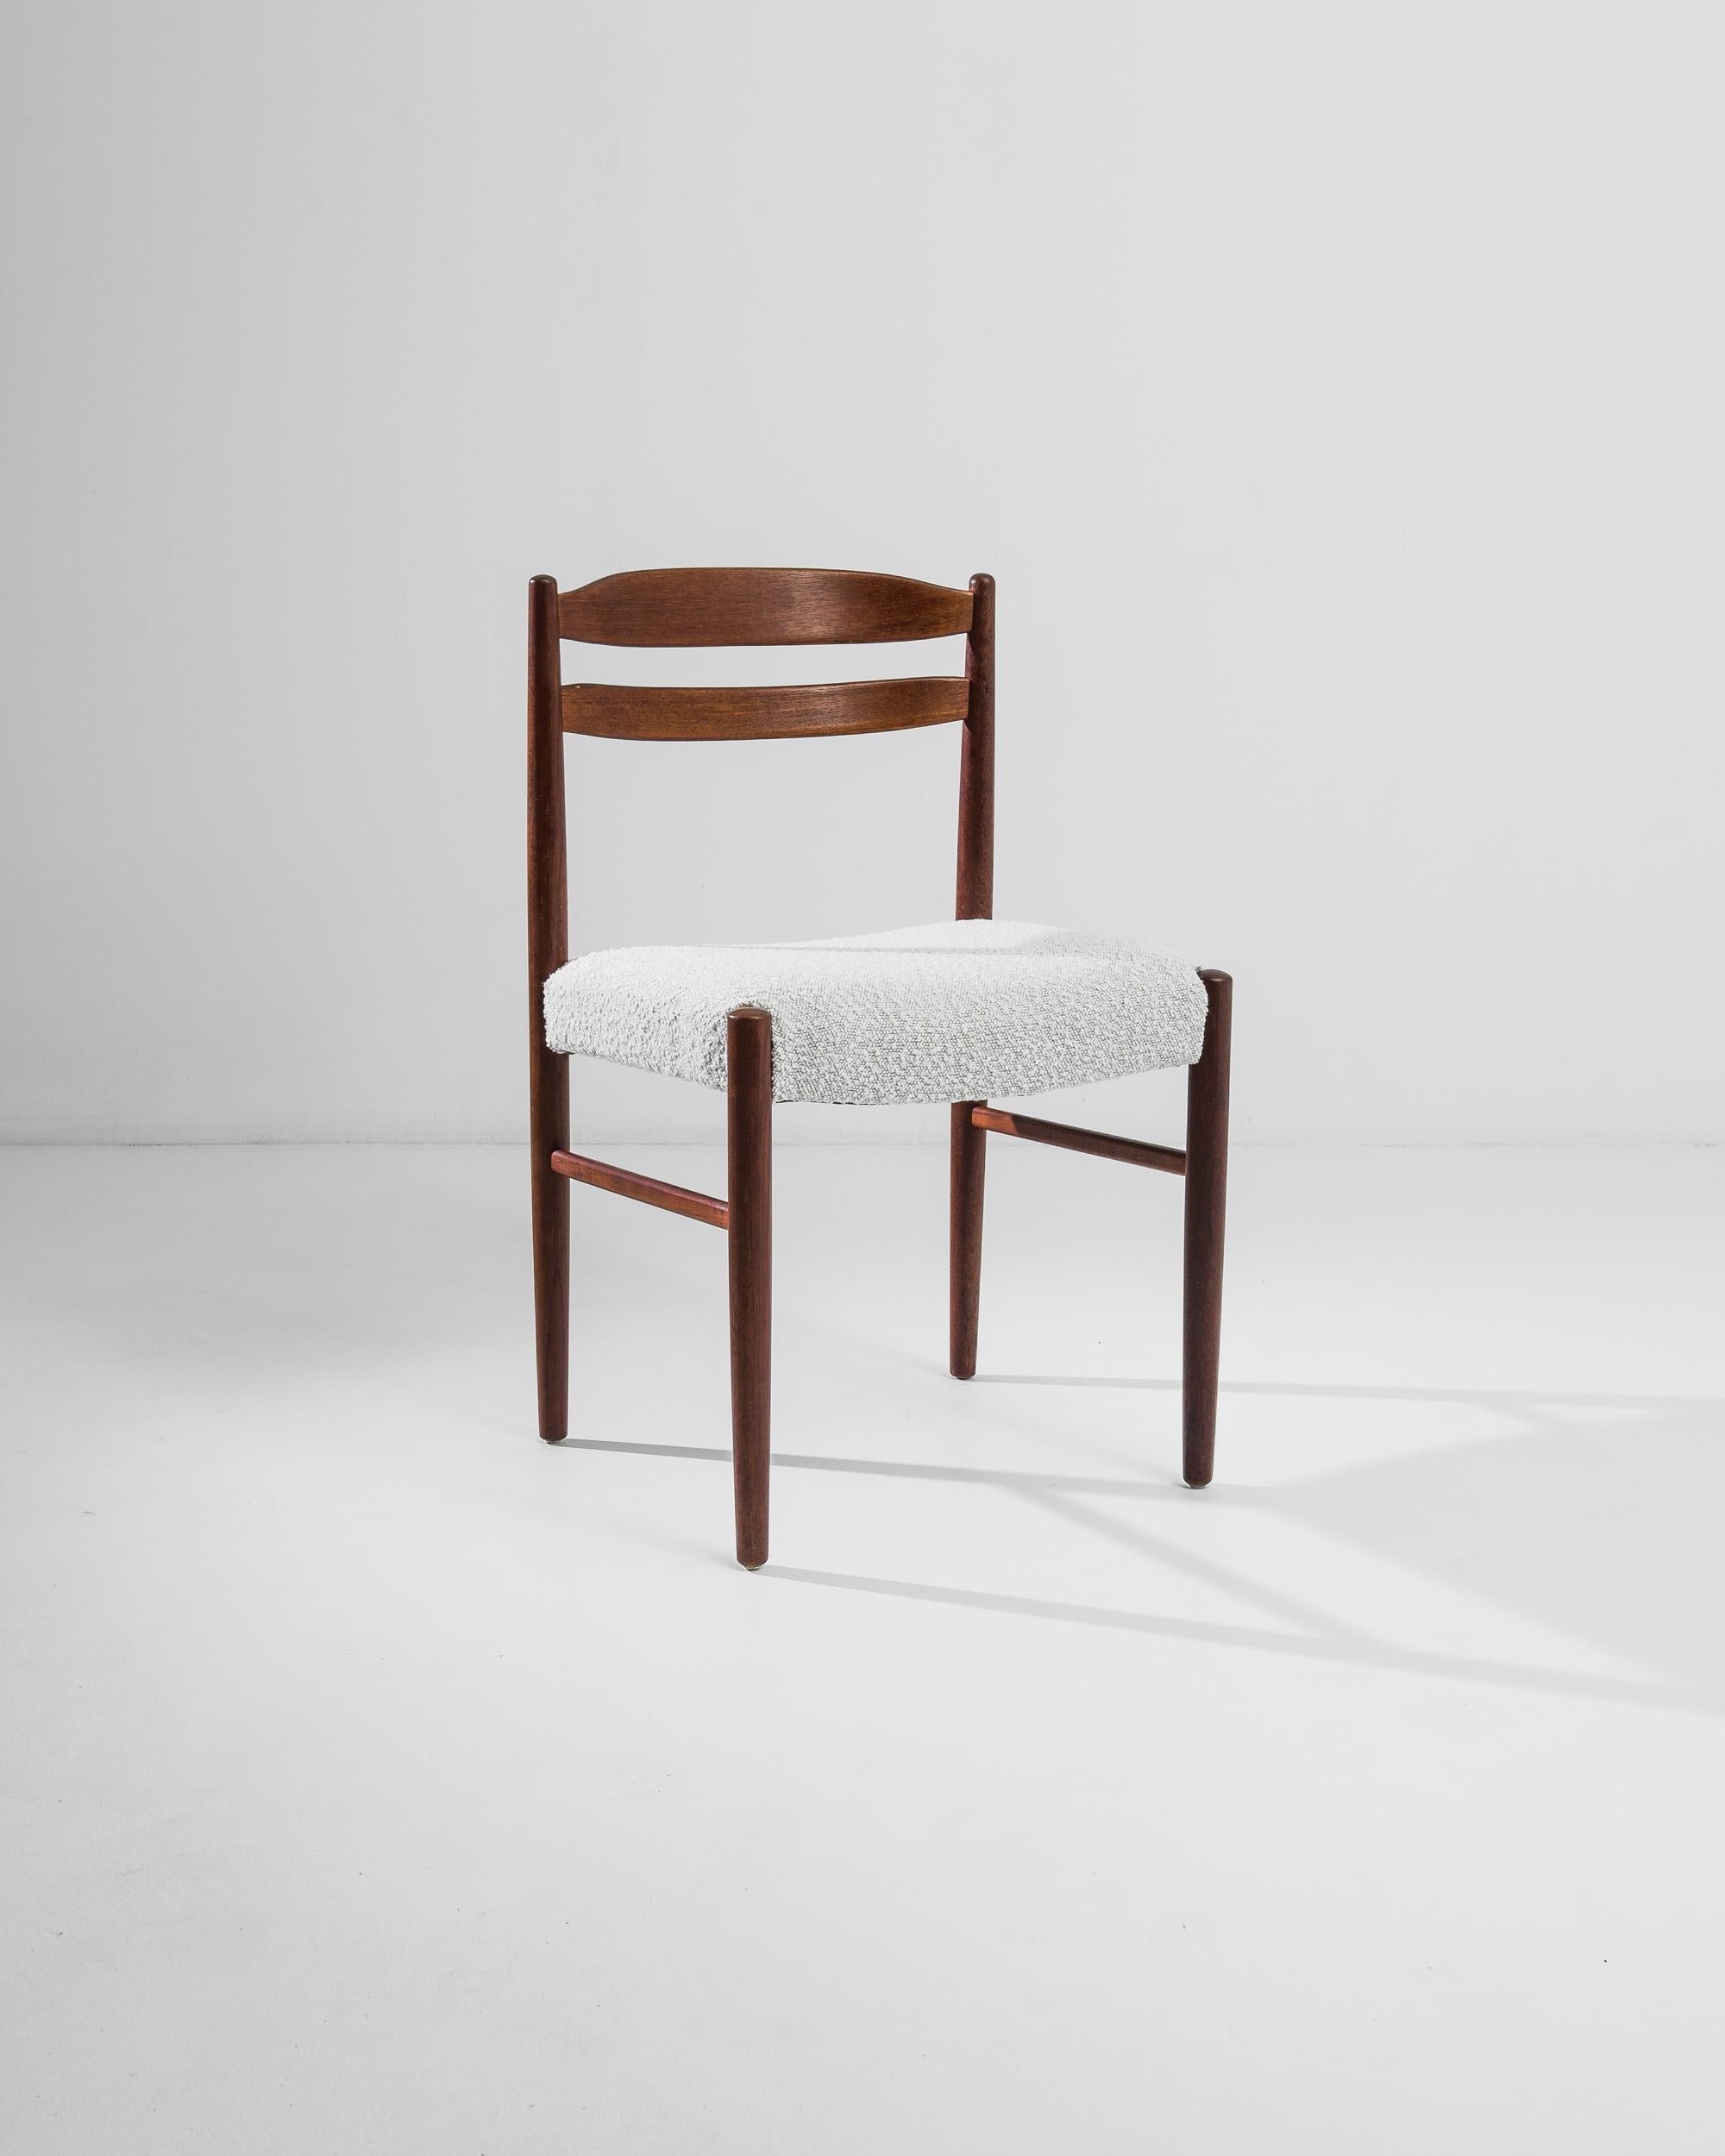 Introducing the epitome of true craftsmanship: our 20th Century Danish Wooden Chair with Upholstered Seat. Crafted with precision and care, this chair exudes timeless elegance and modern sophistication. The rich wood frame showcases the beauty of